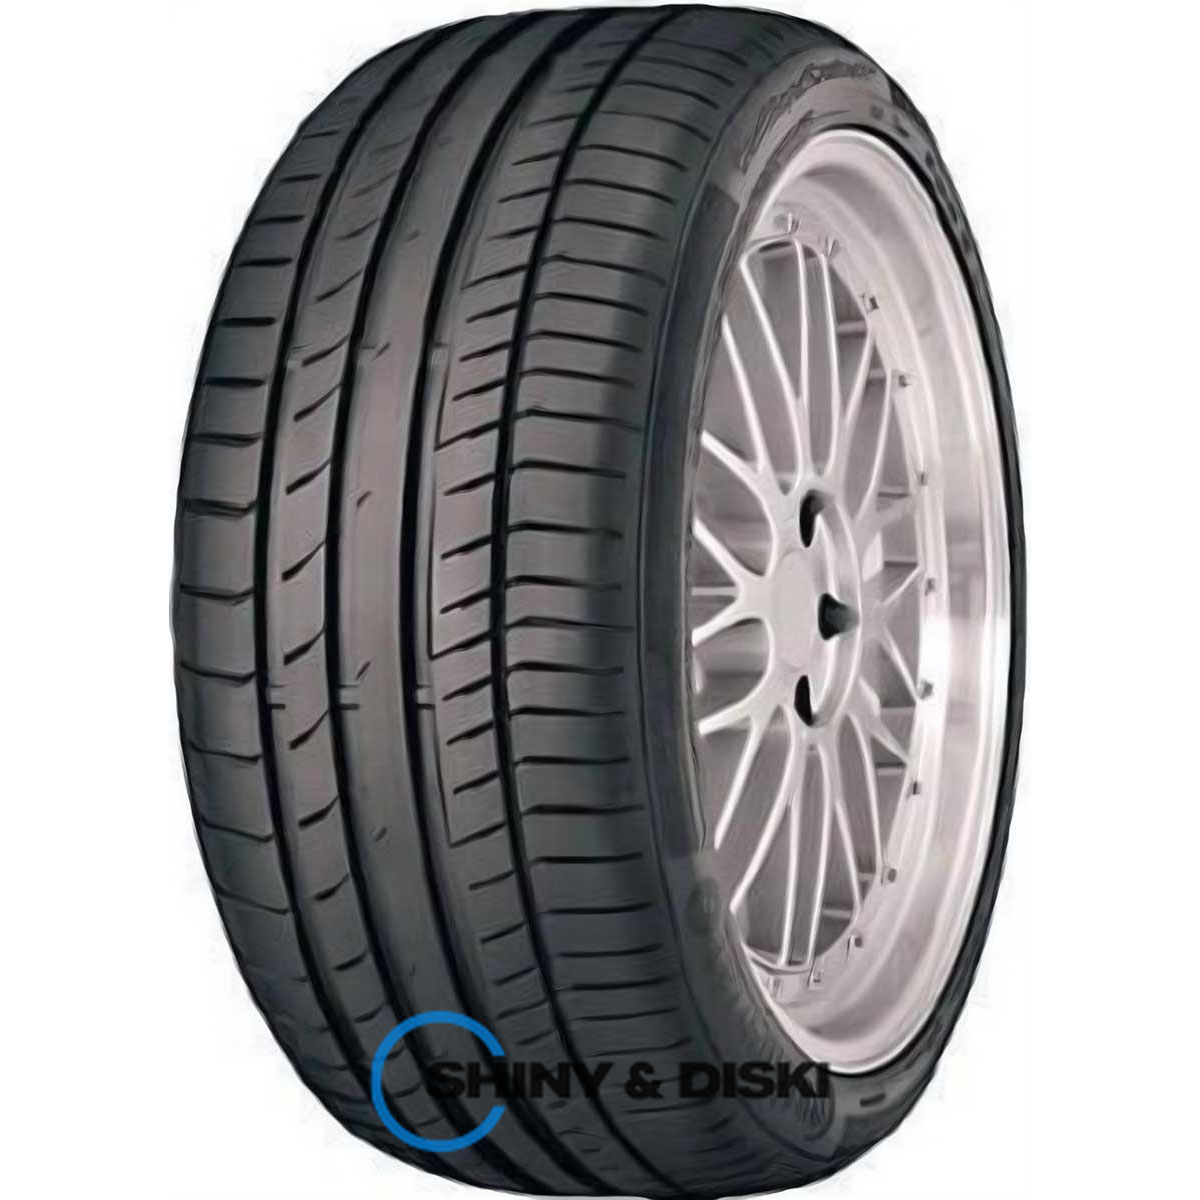 continental sportcontact 5p 285/40 r22 106y fr mo